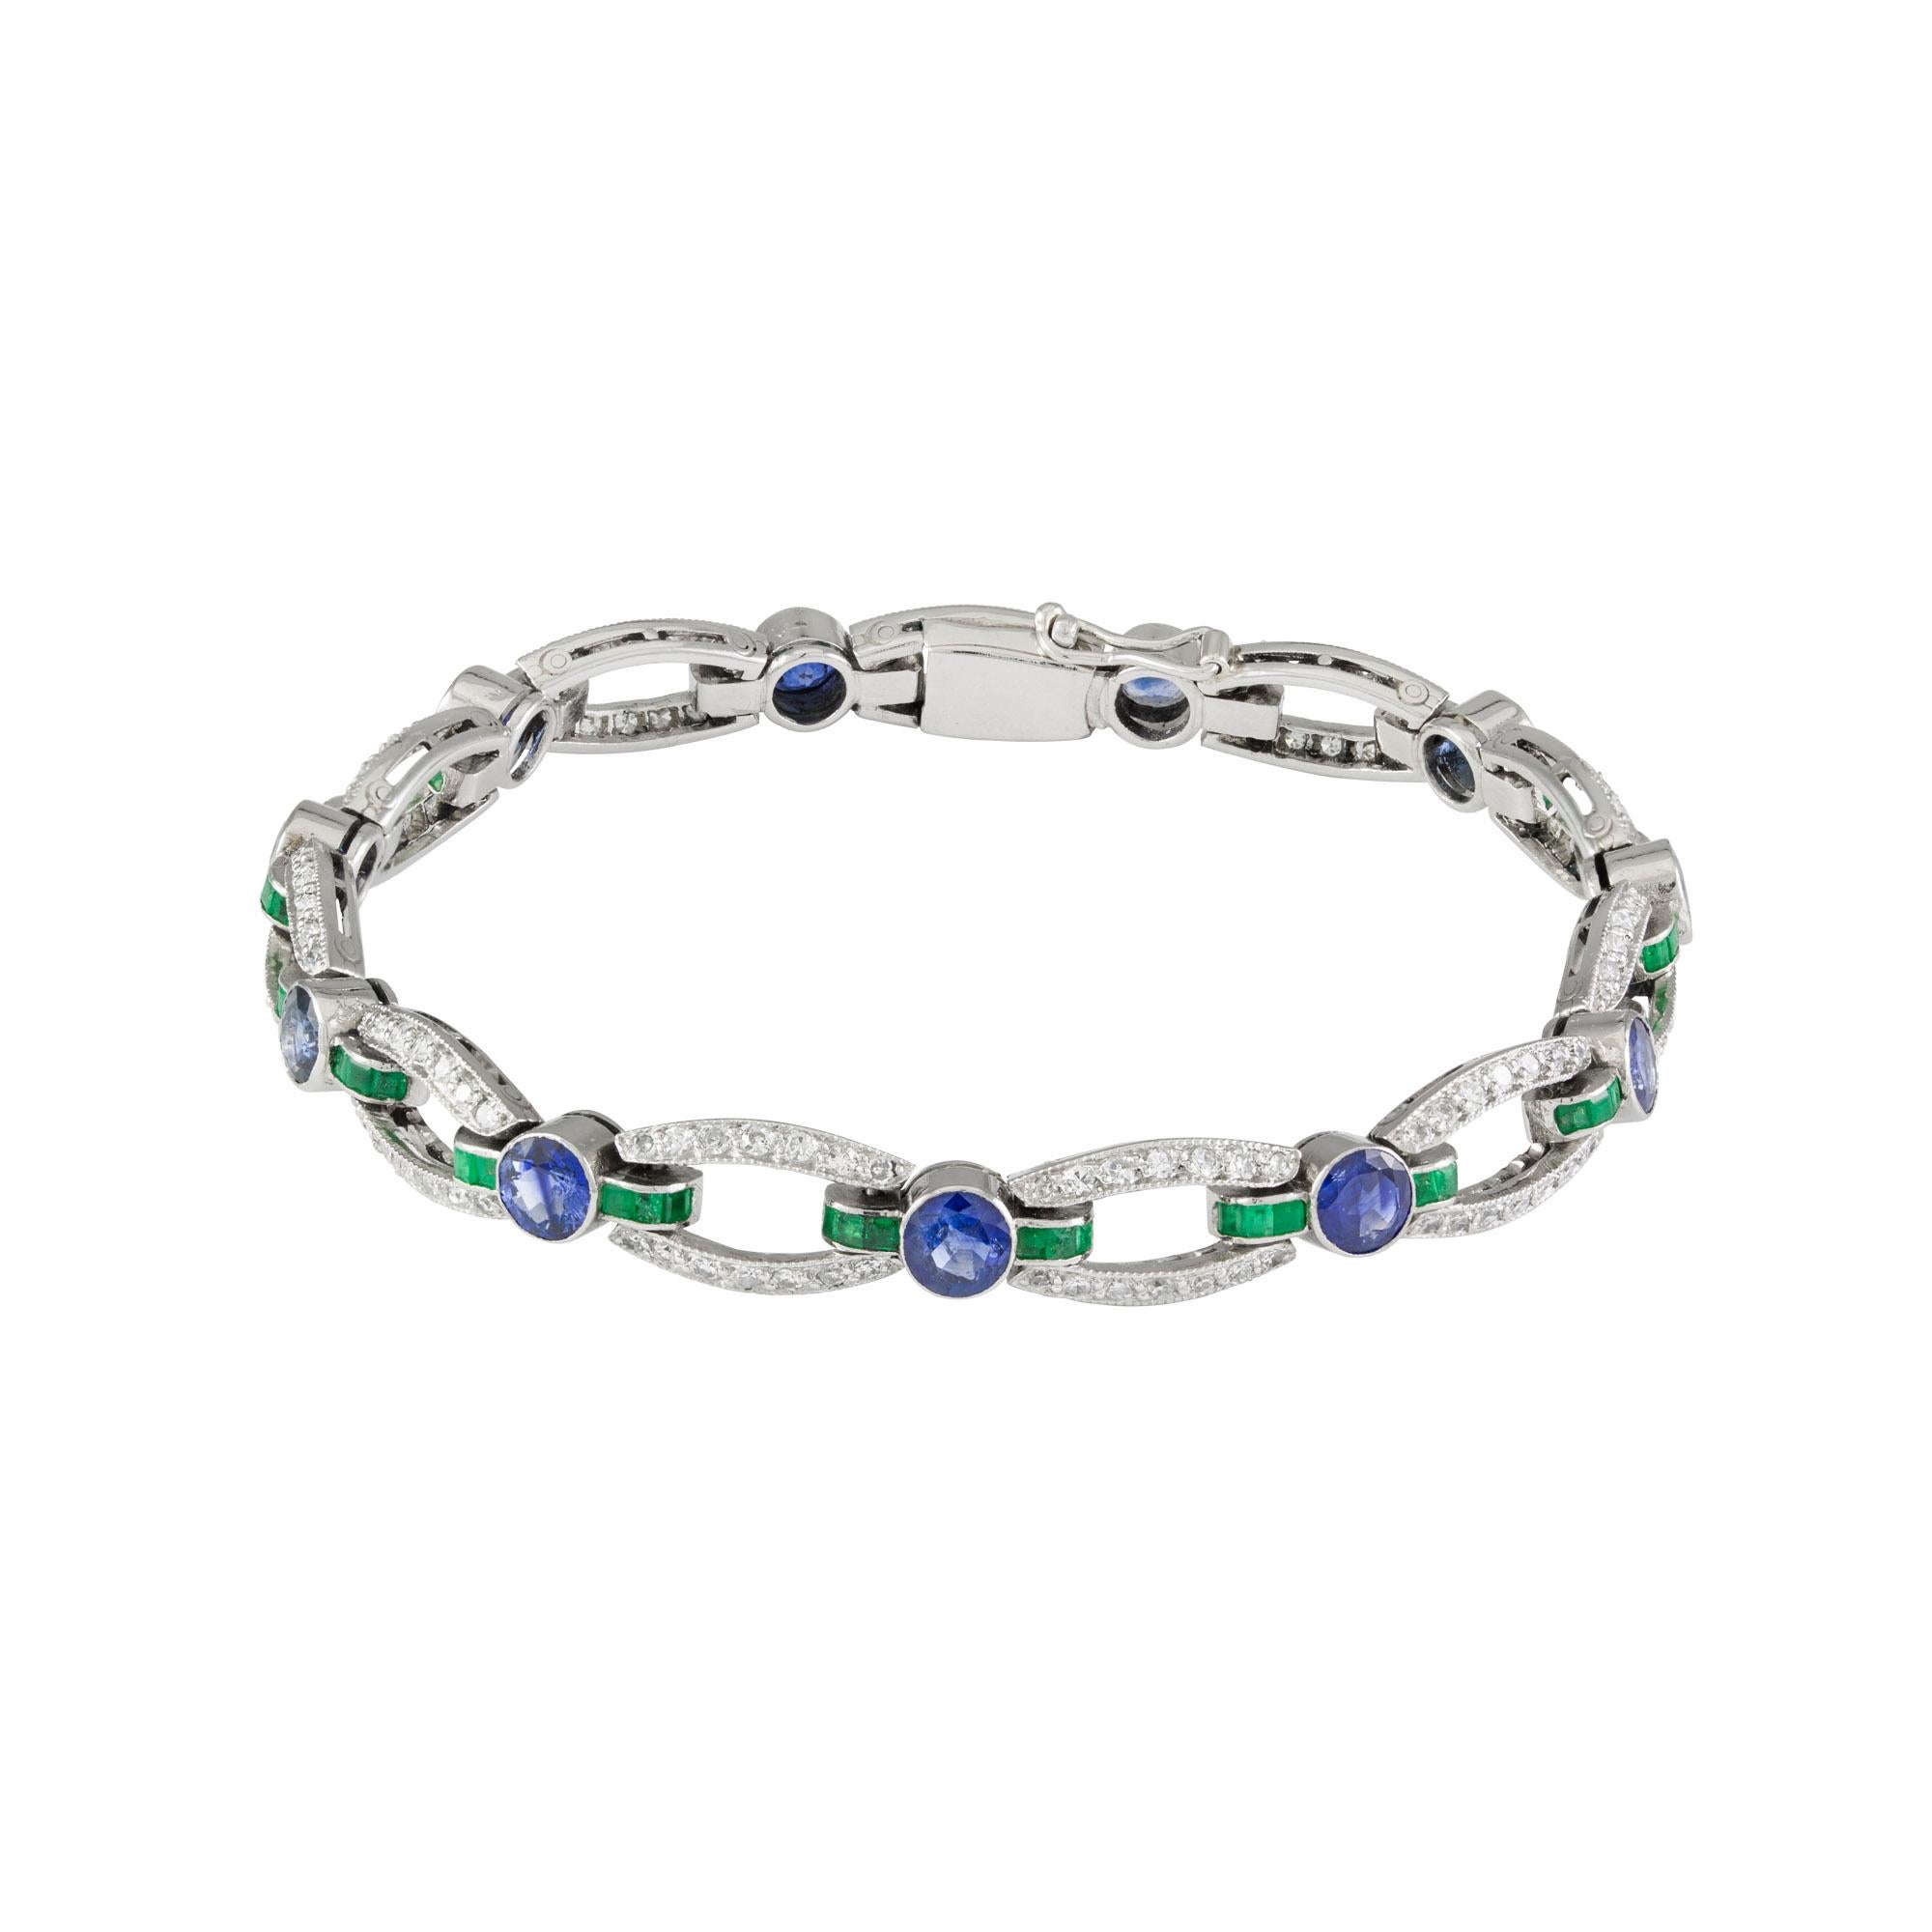 A French Art Deco sapphire, emerald and diamond bracelet, the eleven swiss-cut diamond and square-cut emerald-set open navette-shaped links, the diamonds estimated to weigh 3ct carats in total, the emeralds estimated to weigh 0.7 carats in total,